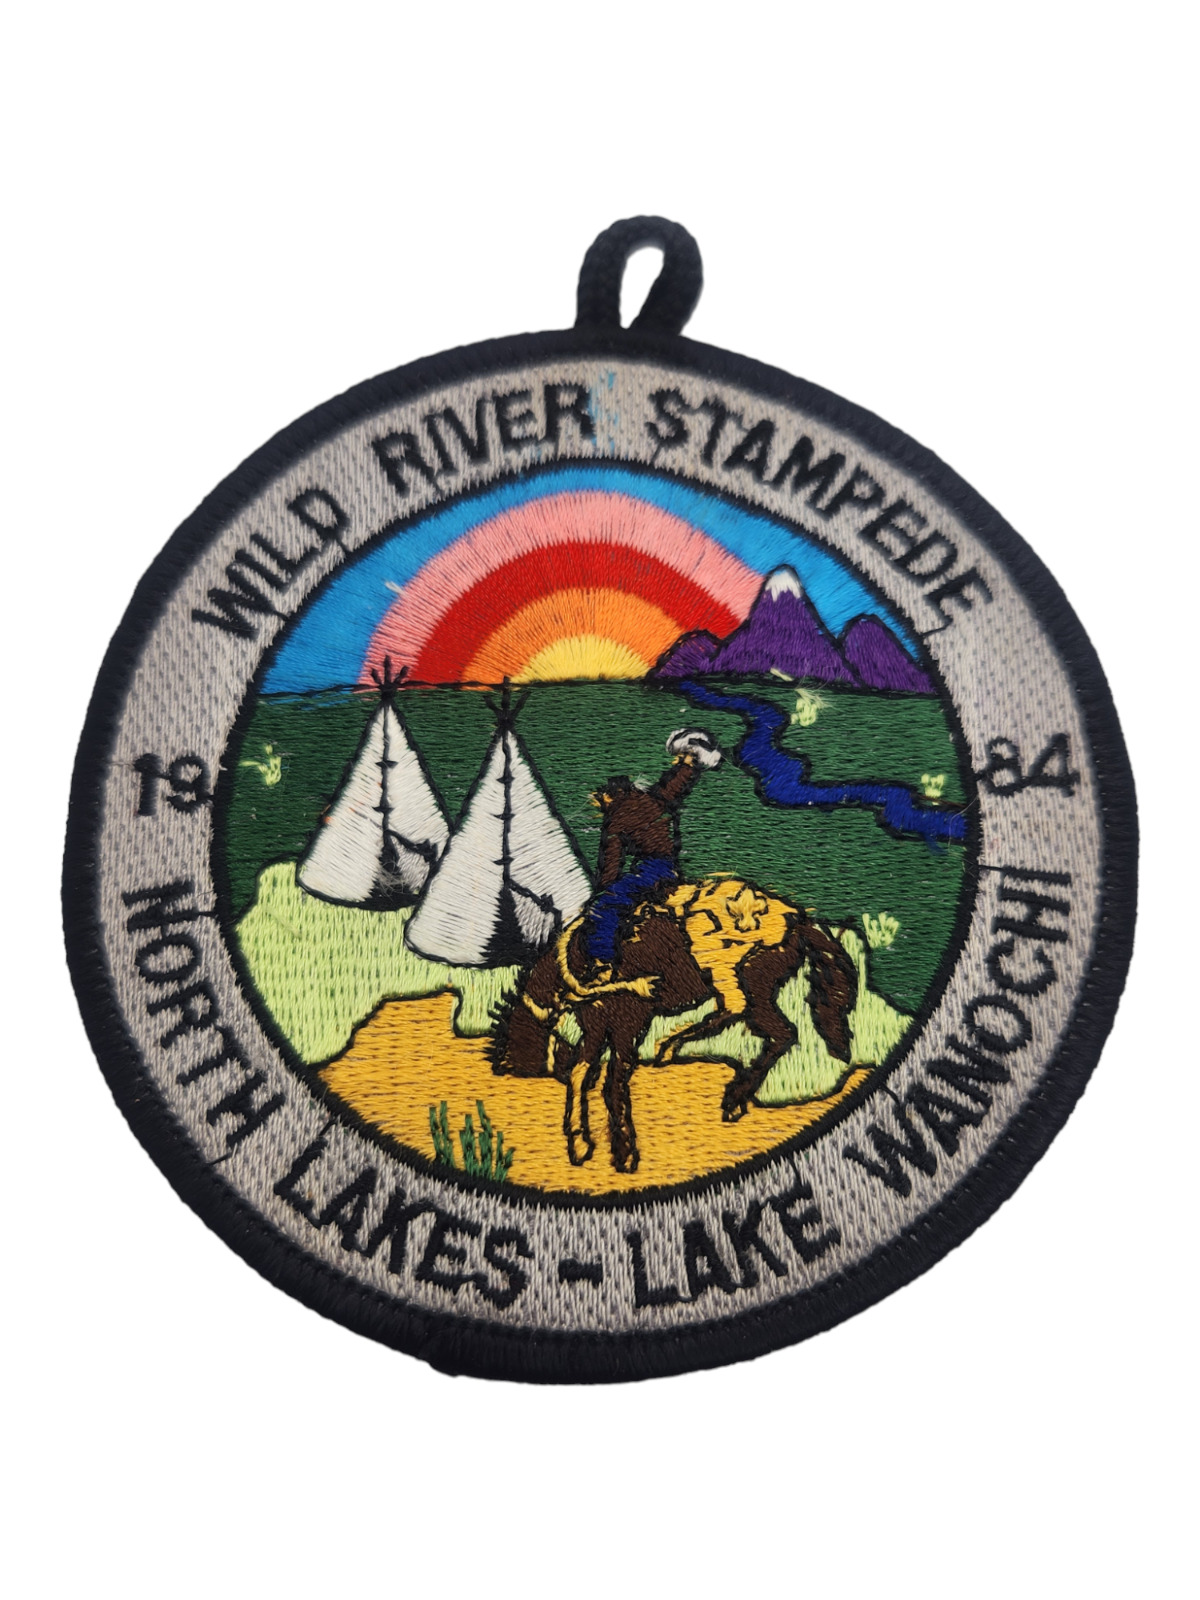 1984 Wild River Stampede North Lakes Lake Wanochi Boy Scout BSA Patch